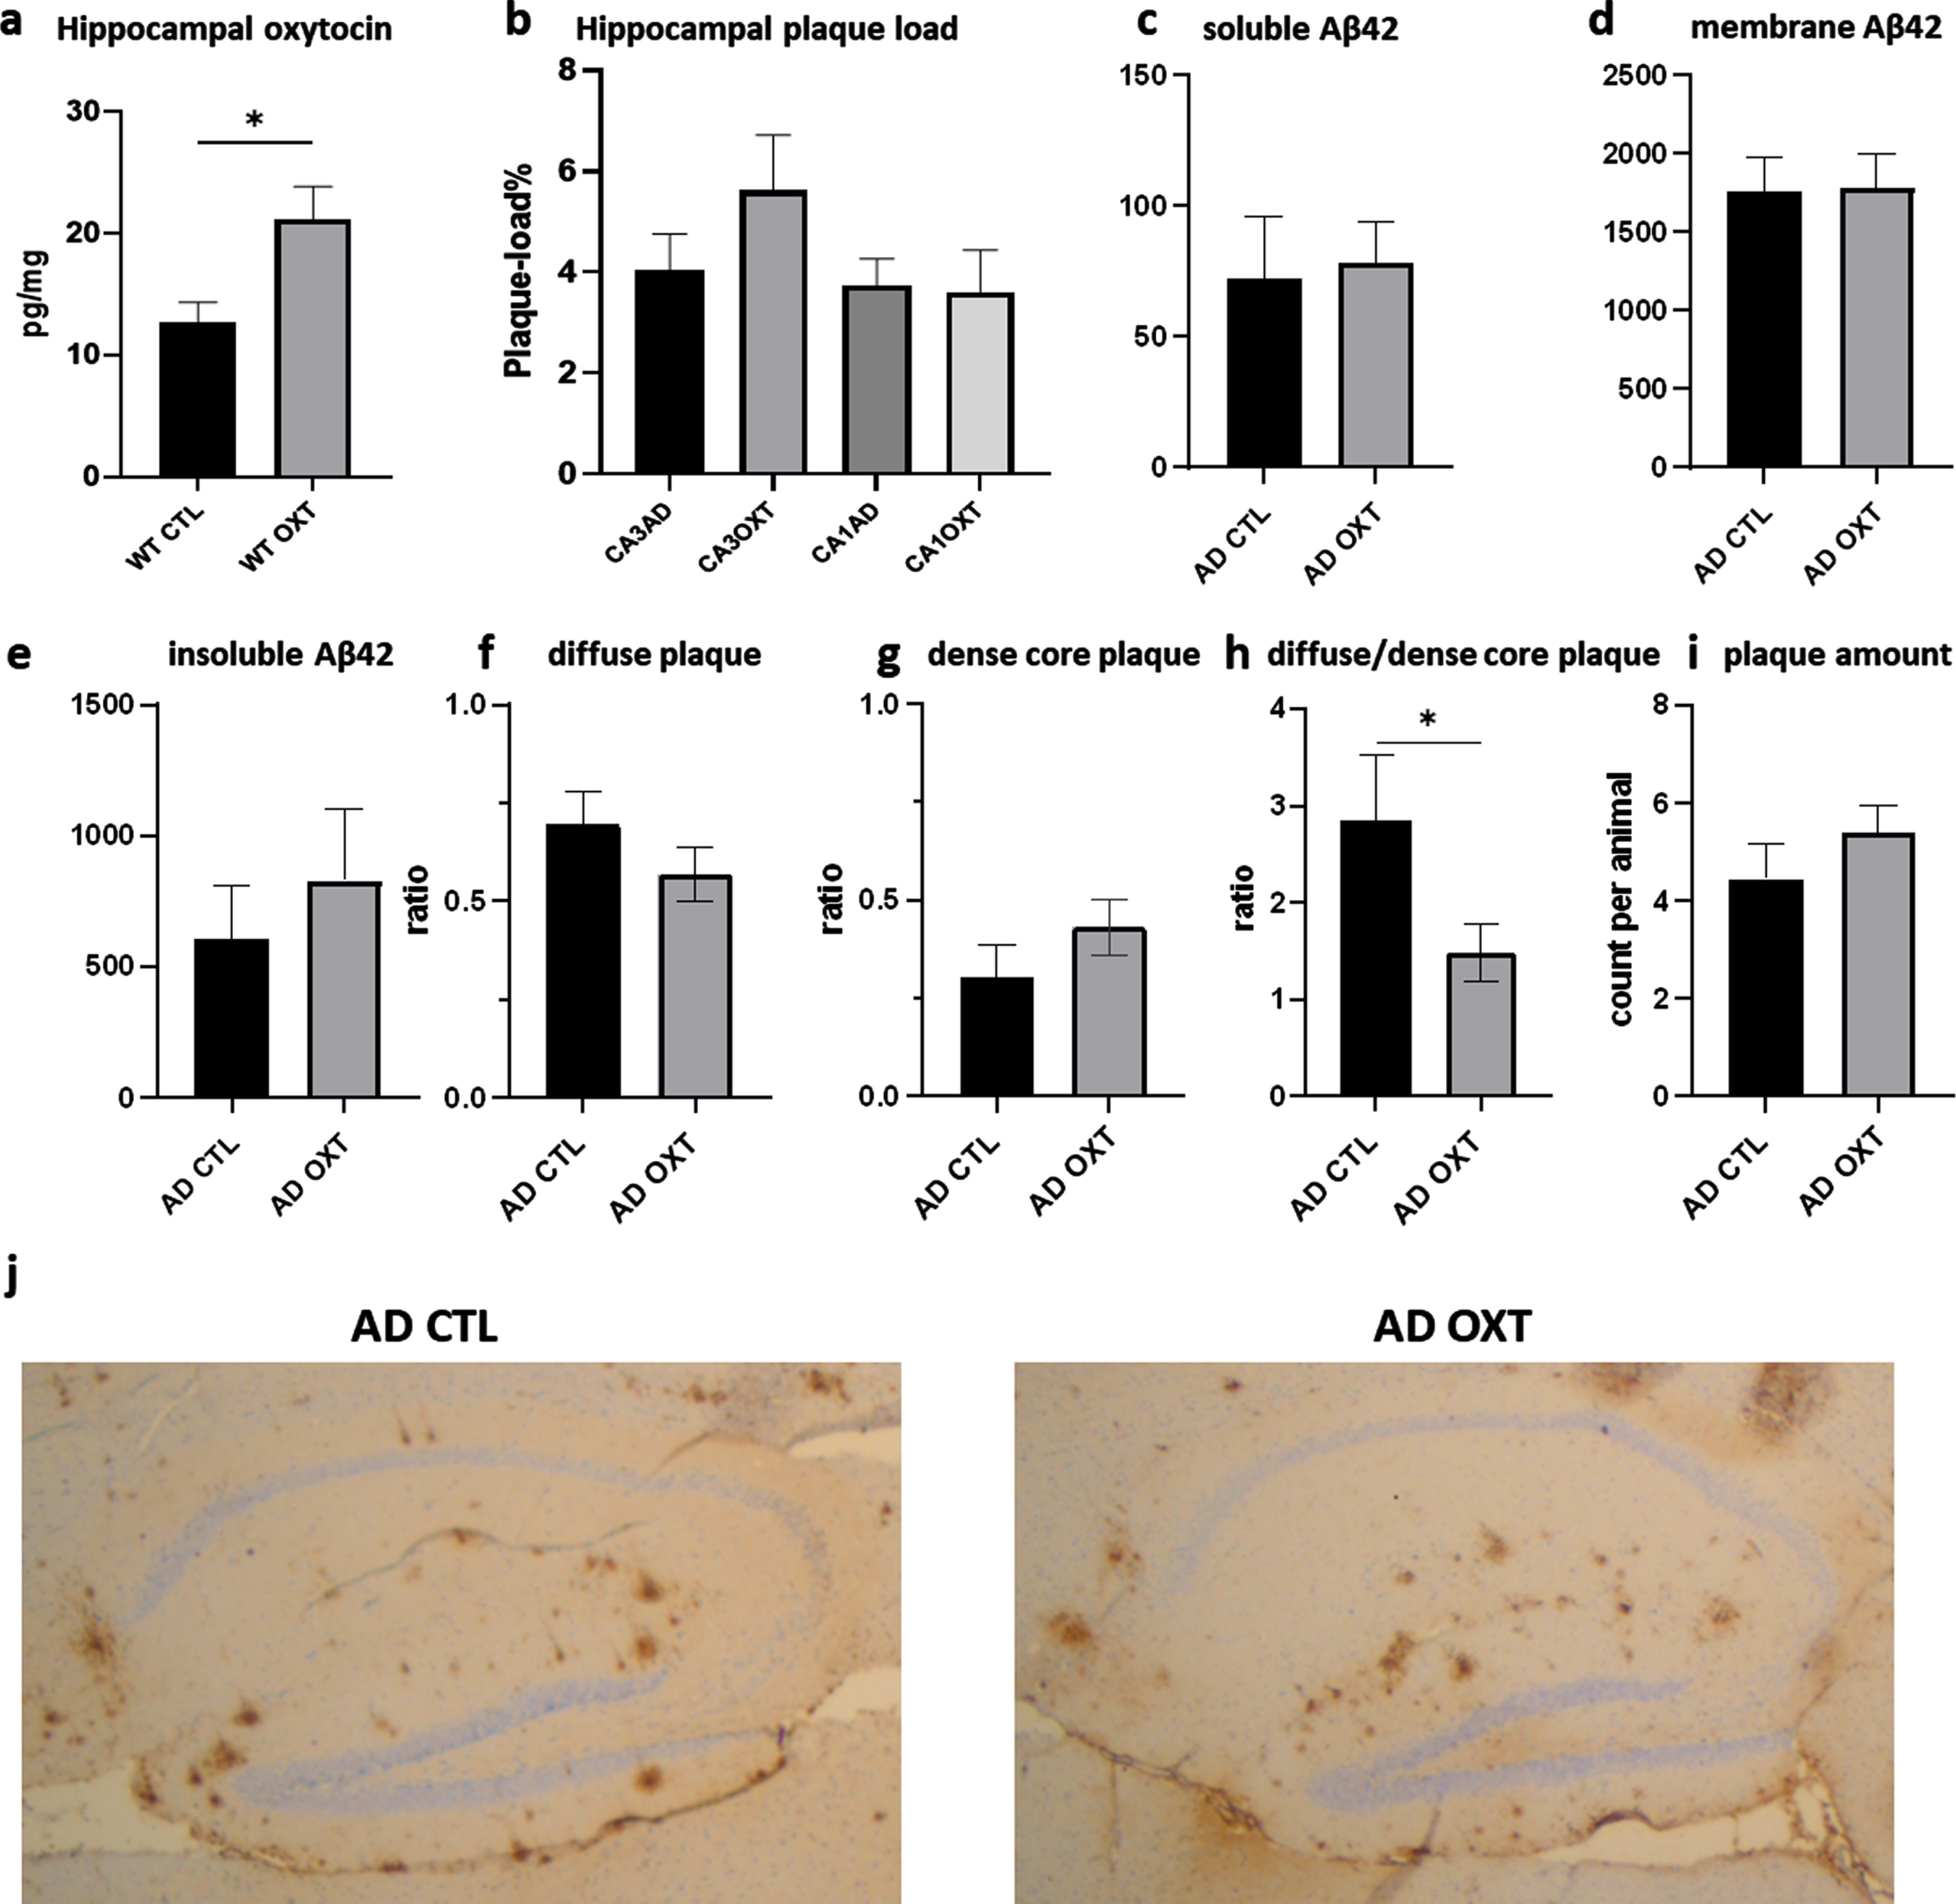 Intranasal administration of oxytocin increases hippocampal oxytocin levels in WT animals (a) does not alter the hippocampal plaque load in APPswePS1dE9 mice treated with oxytocin(b-i). Animals treated with oxytocin show a significant increase of hippocampal oxytocin levels over animals treated with saline (e) (Mann-Whitney test: WT CTL versus WT OXT p = 0.02 n = 8) (a). Aβ plaque load was quantified at 20x magnification in the hippocampus of APPswePS1dE9 mice by immunohistochemically staining Aβ (n = 8). Plaque load was calculated as the percentage of the total hippocampal surface area. Plaque load was not found to be altered within the hippocampus (p = 0.07) after oxytocin administration (Mann-Whitney test) (b). Hippocampal Aβ42 plaque-load by means of an ELISA showed no effect in soluble (c), membrane-associated (d) and insoluble fraction (e) of Aβ42 in AD animals. There was no observable difference in diffuse or dense core plaques or plaque amount between AD CTL and AD OXT (f-g). There are more diffuse plaques compared to dense plaques in AD CTL compared to AD OXT animals (p = 0.04) (h). Representative images of the Aβ-stained hippocampus and cortex for the APPswePS1dE9 control group, the APPswePS1dE9 oxytocin-treated group are shown at 2.5x magnification (j). Bars represent mean±SEM. Aβ, amyloid-β; AD, Alzheimer’s disease; WT, wild type. *p < 0.05.